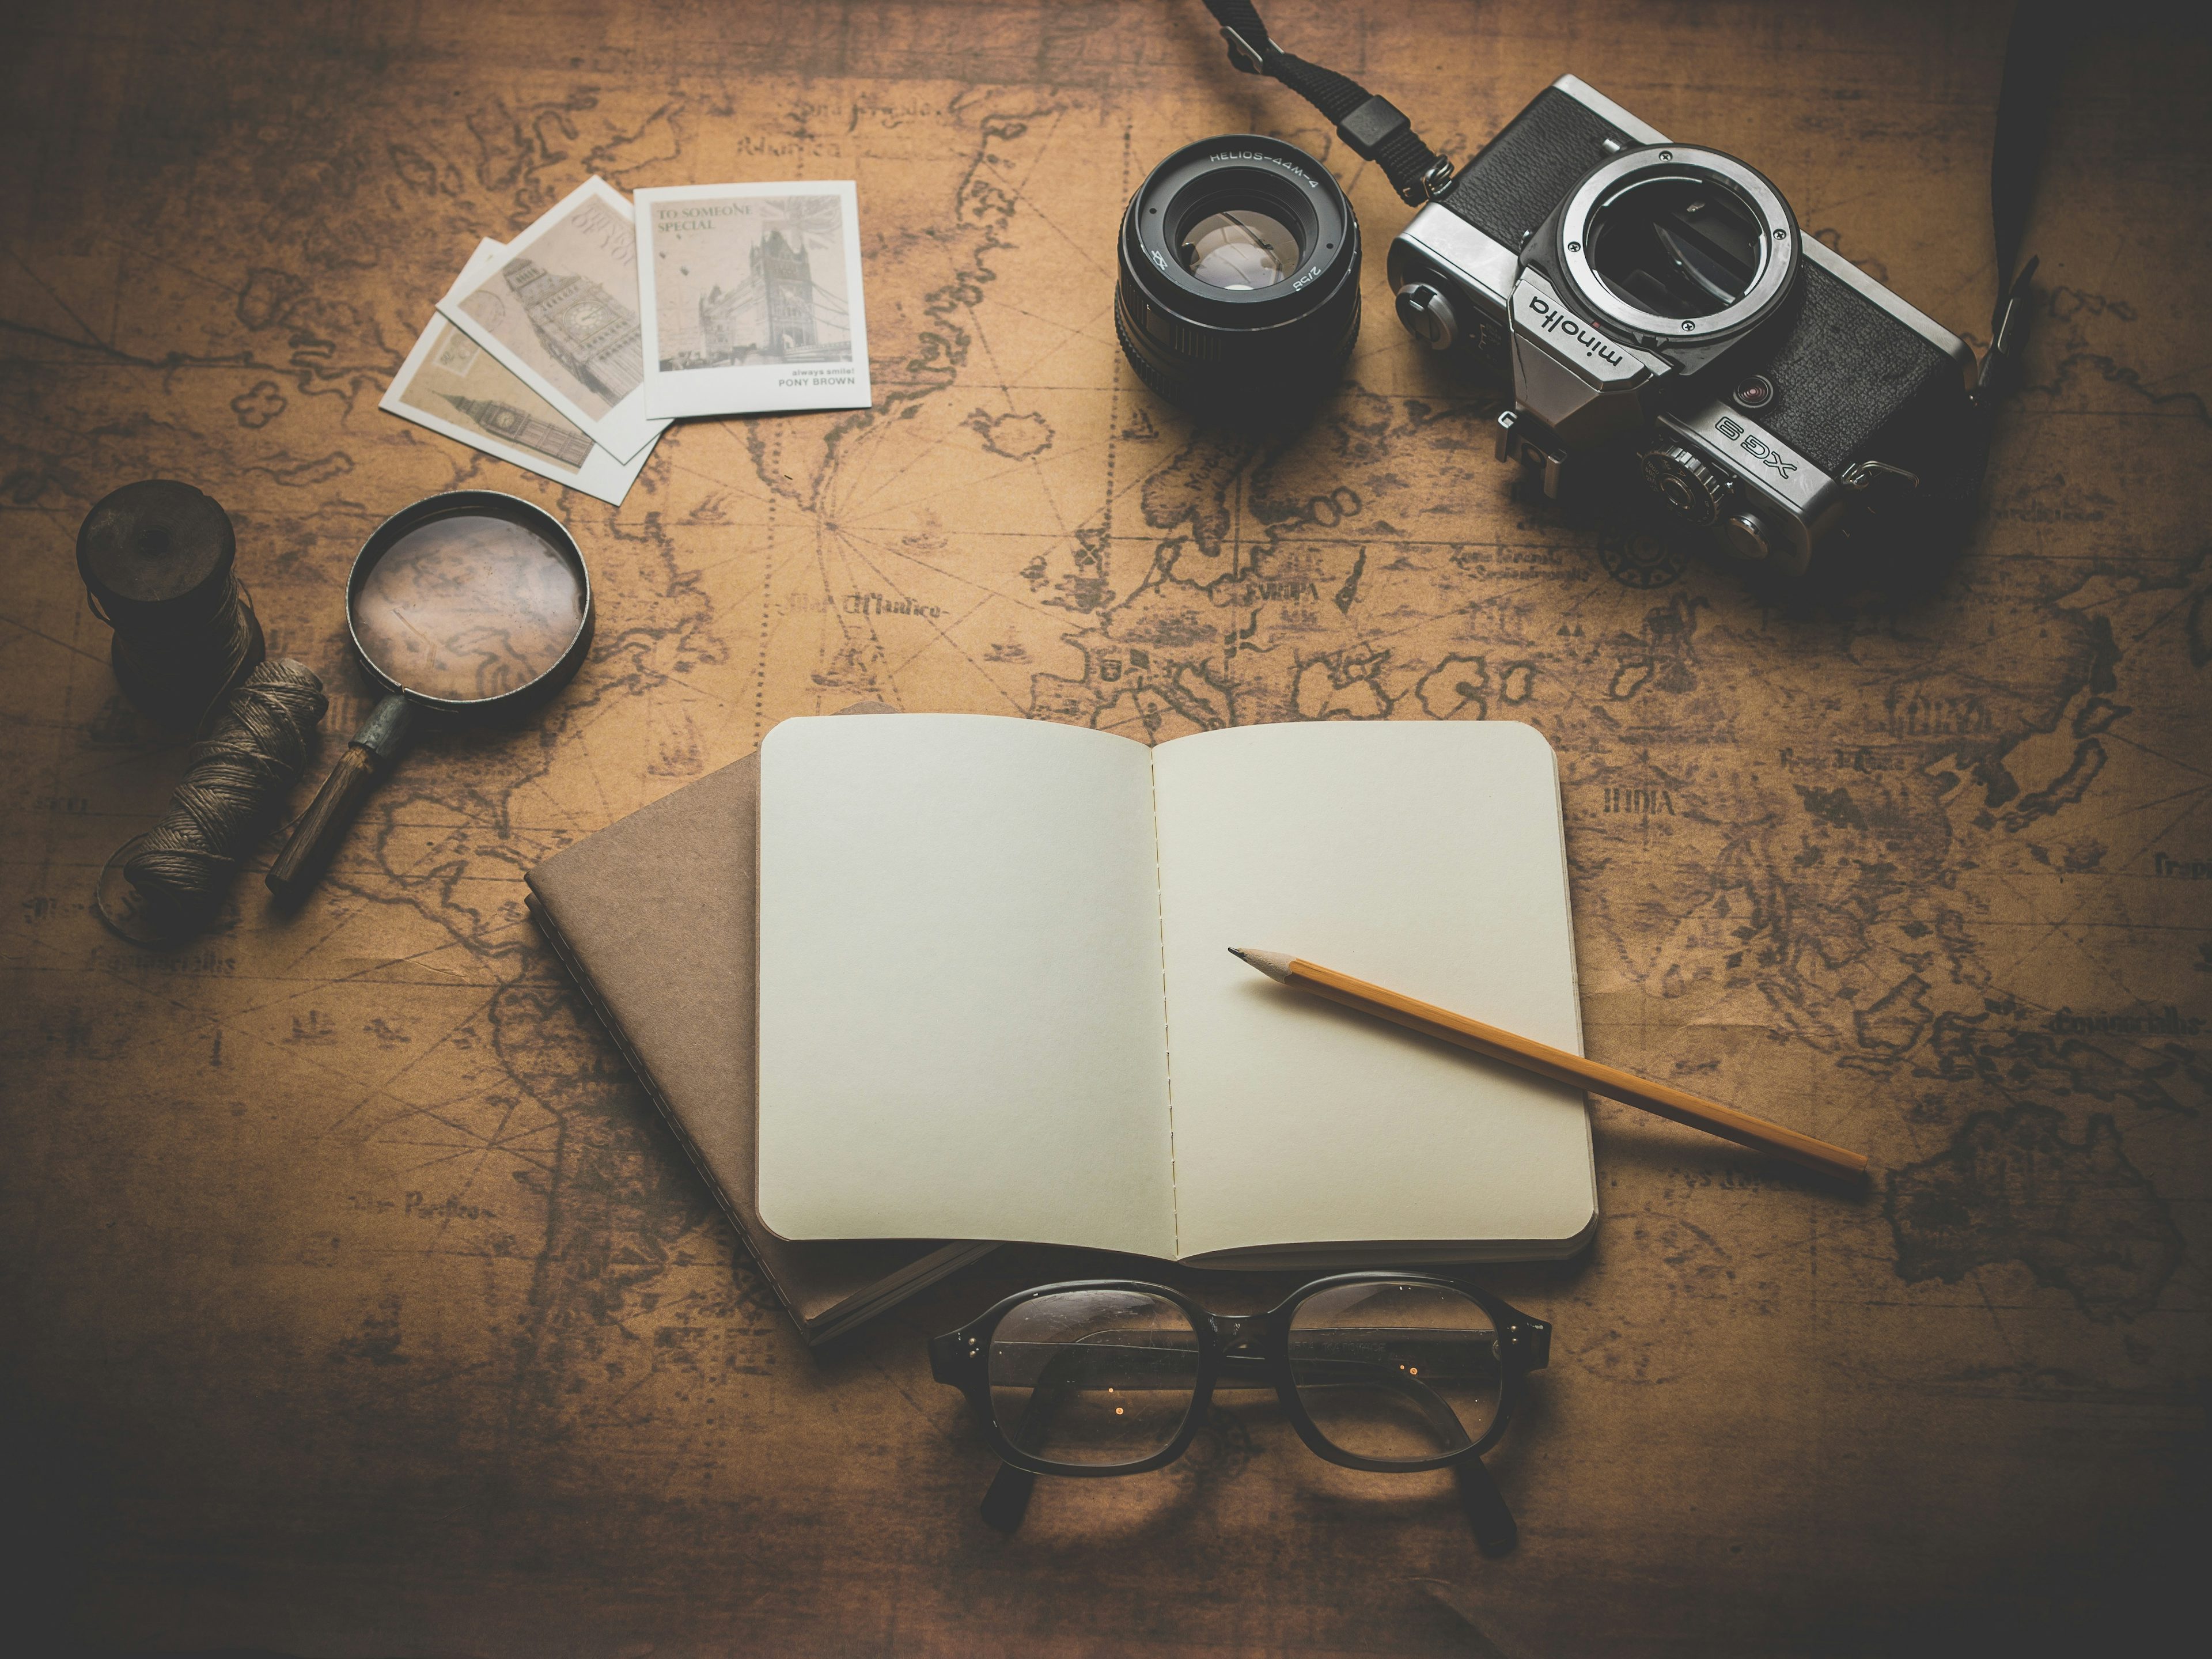 An open and empty journal rests next to a camera, a map and a loupe.